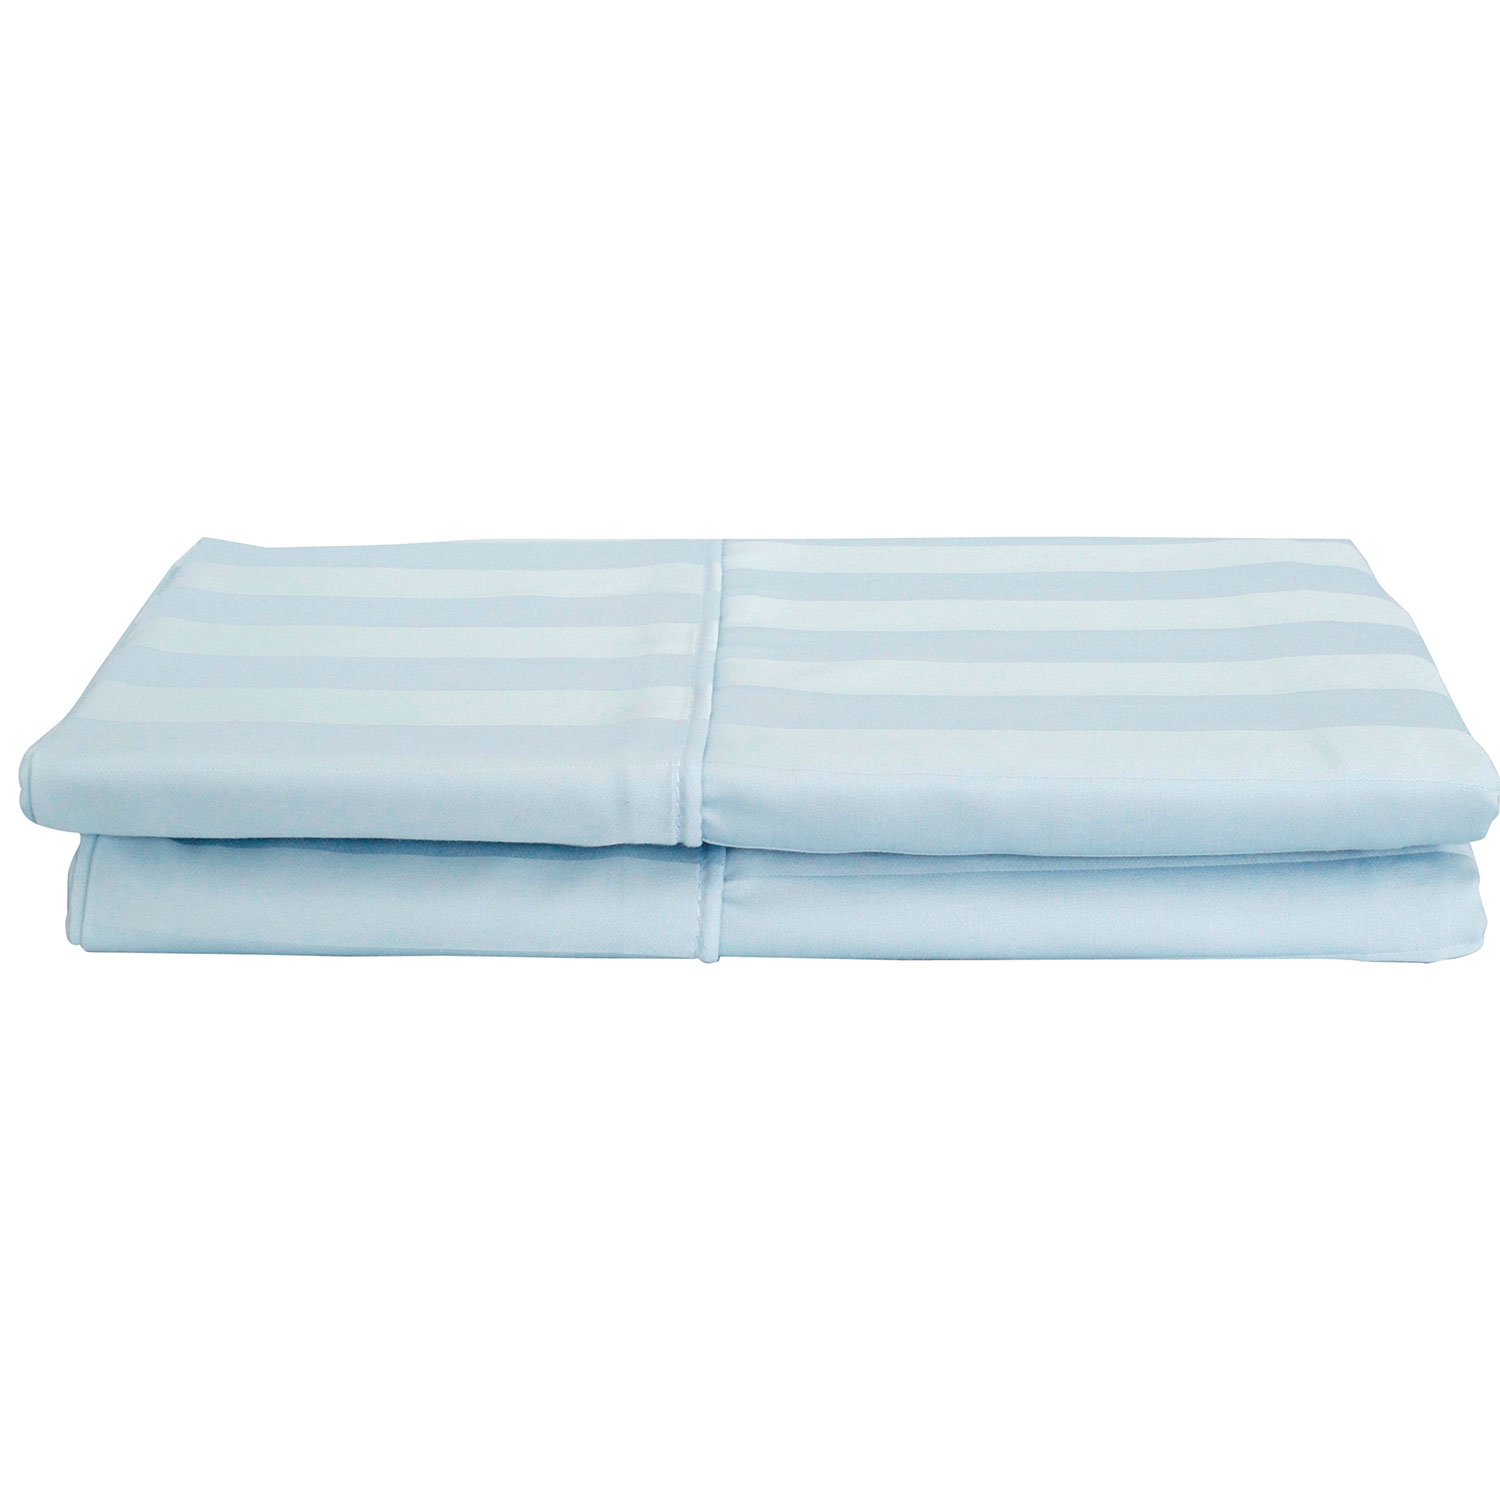 Maholi Damask Stripe Collection 310 Thread Count Rayon Pillow Case - 2 Pack - King - Blue